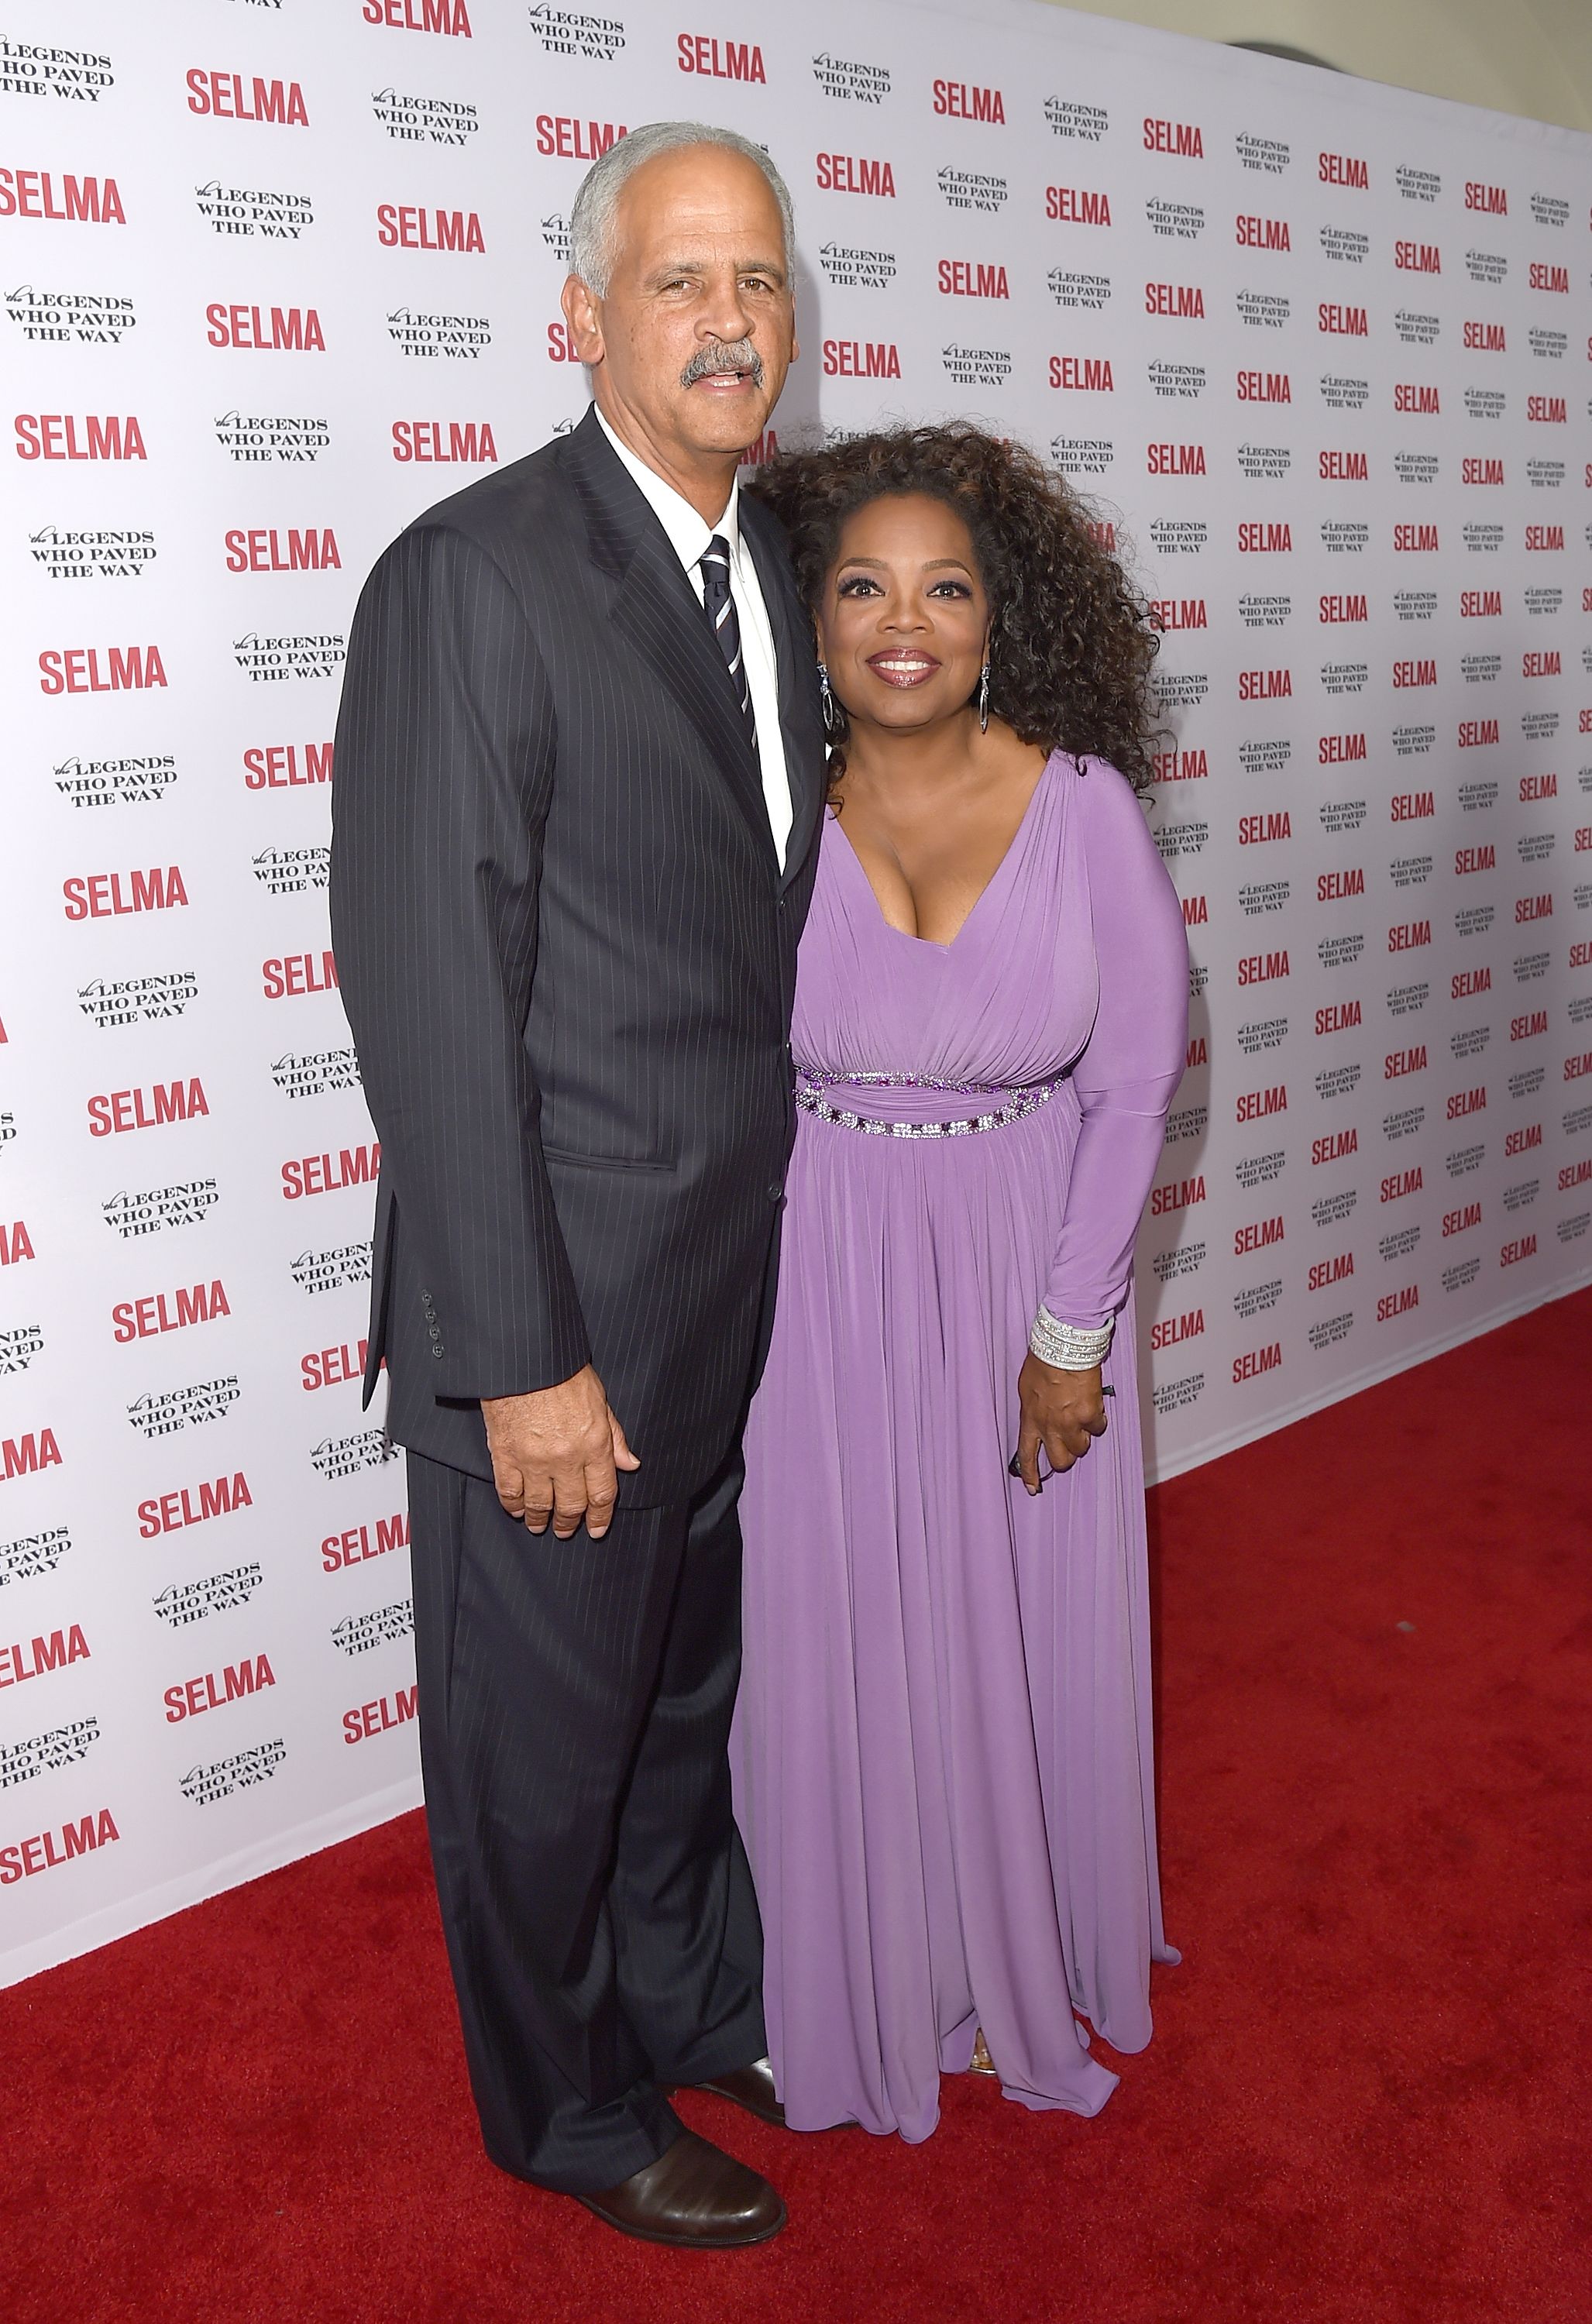 Oprah Winfrey and Stedman Graham attend the 'Selma' and the Legends Who Paved the Way Gala. | Source: Getty Images